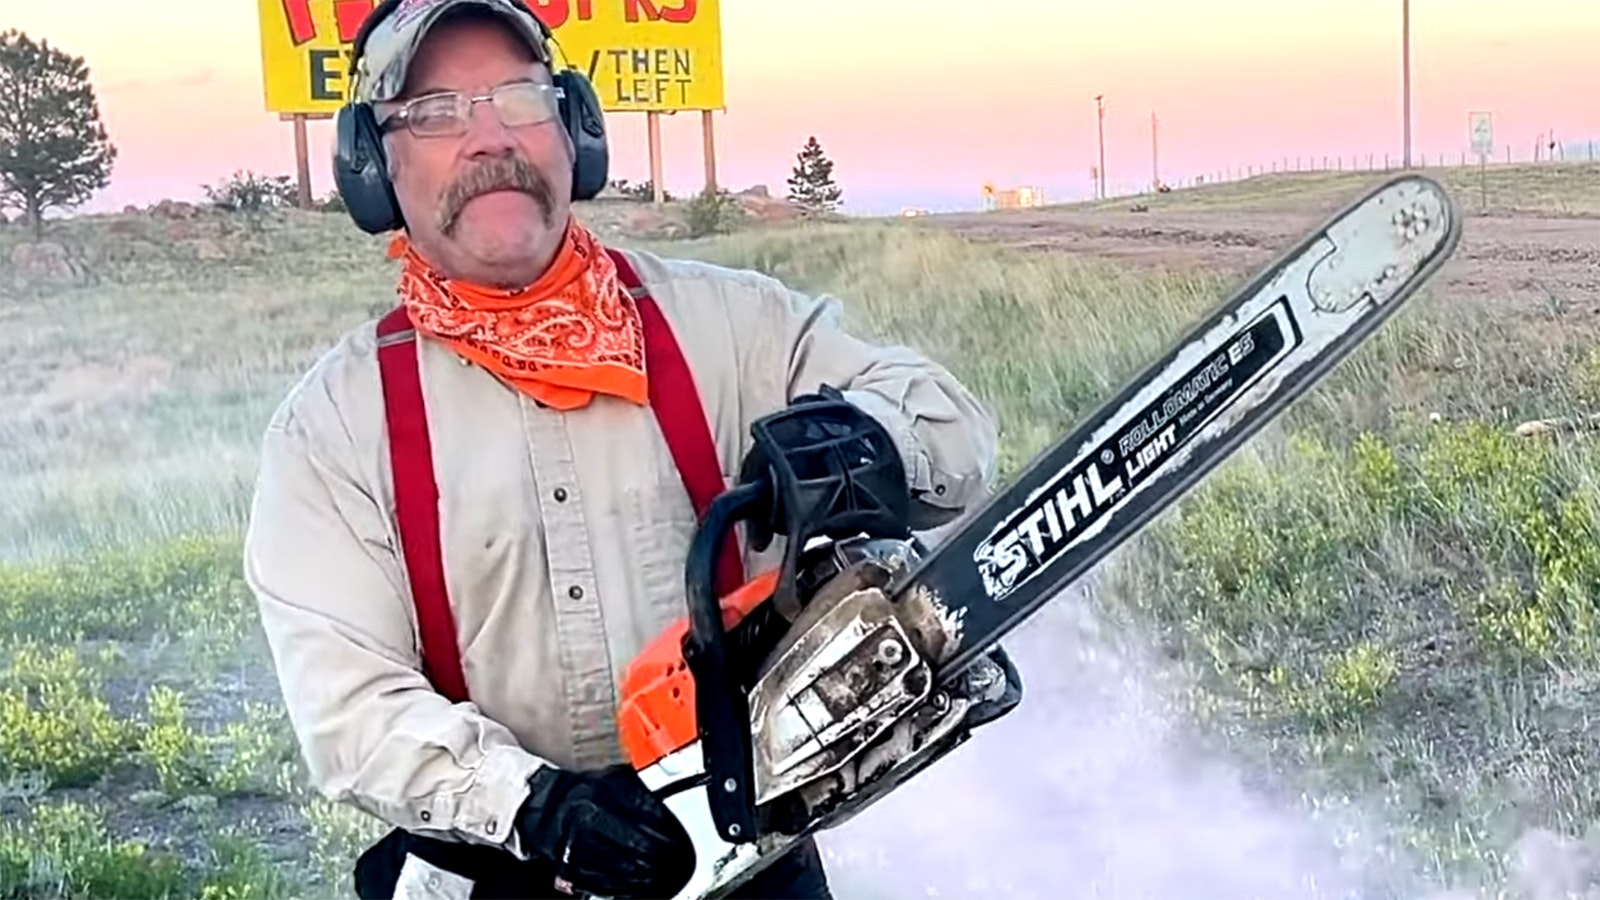 Cowboy State Daily outdoors writer Mark Heinz plays "The Star Spangled Banner" on his Stihl MS 261 chainsaw.